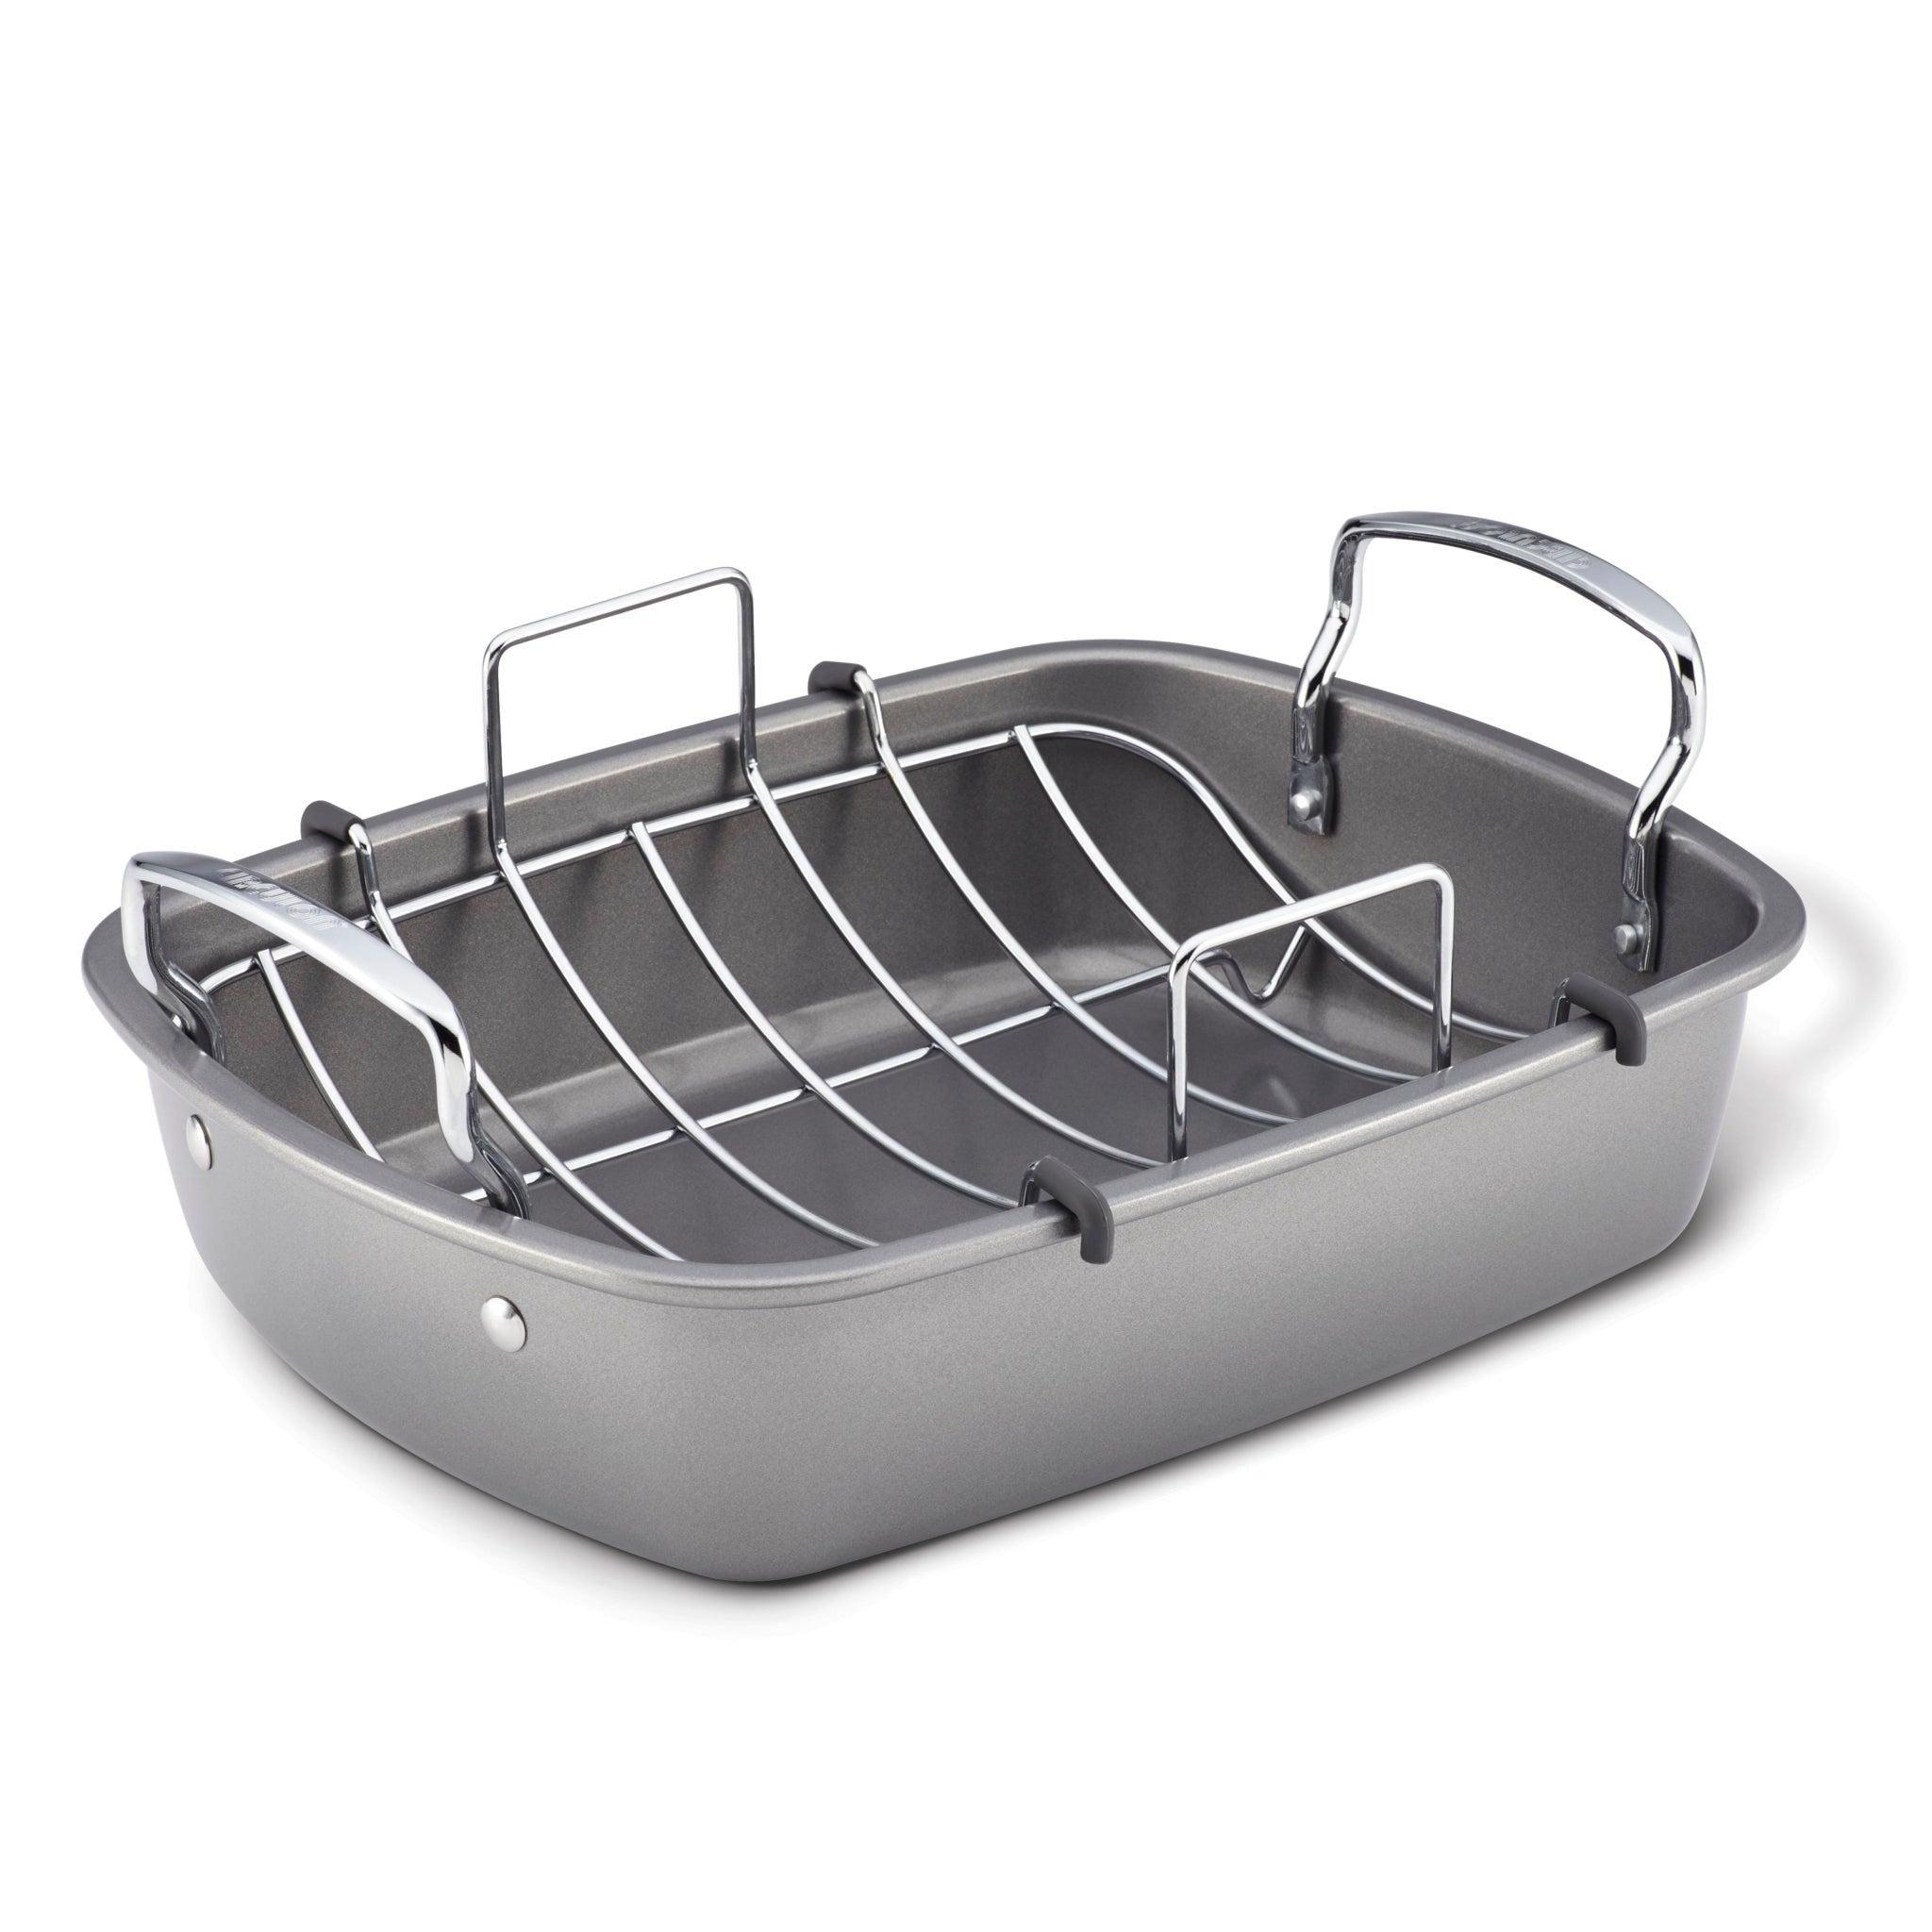 Turkey Roasting Pan with Rack (Grey/Black), by Home Basics | Carbon Steel Non-Stick Pan with Handles | 20 Roaster Great for Ham, Roast Beef, and